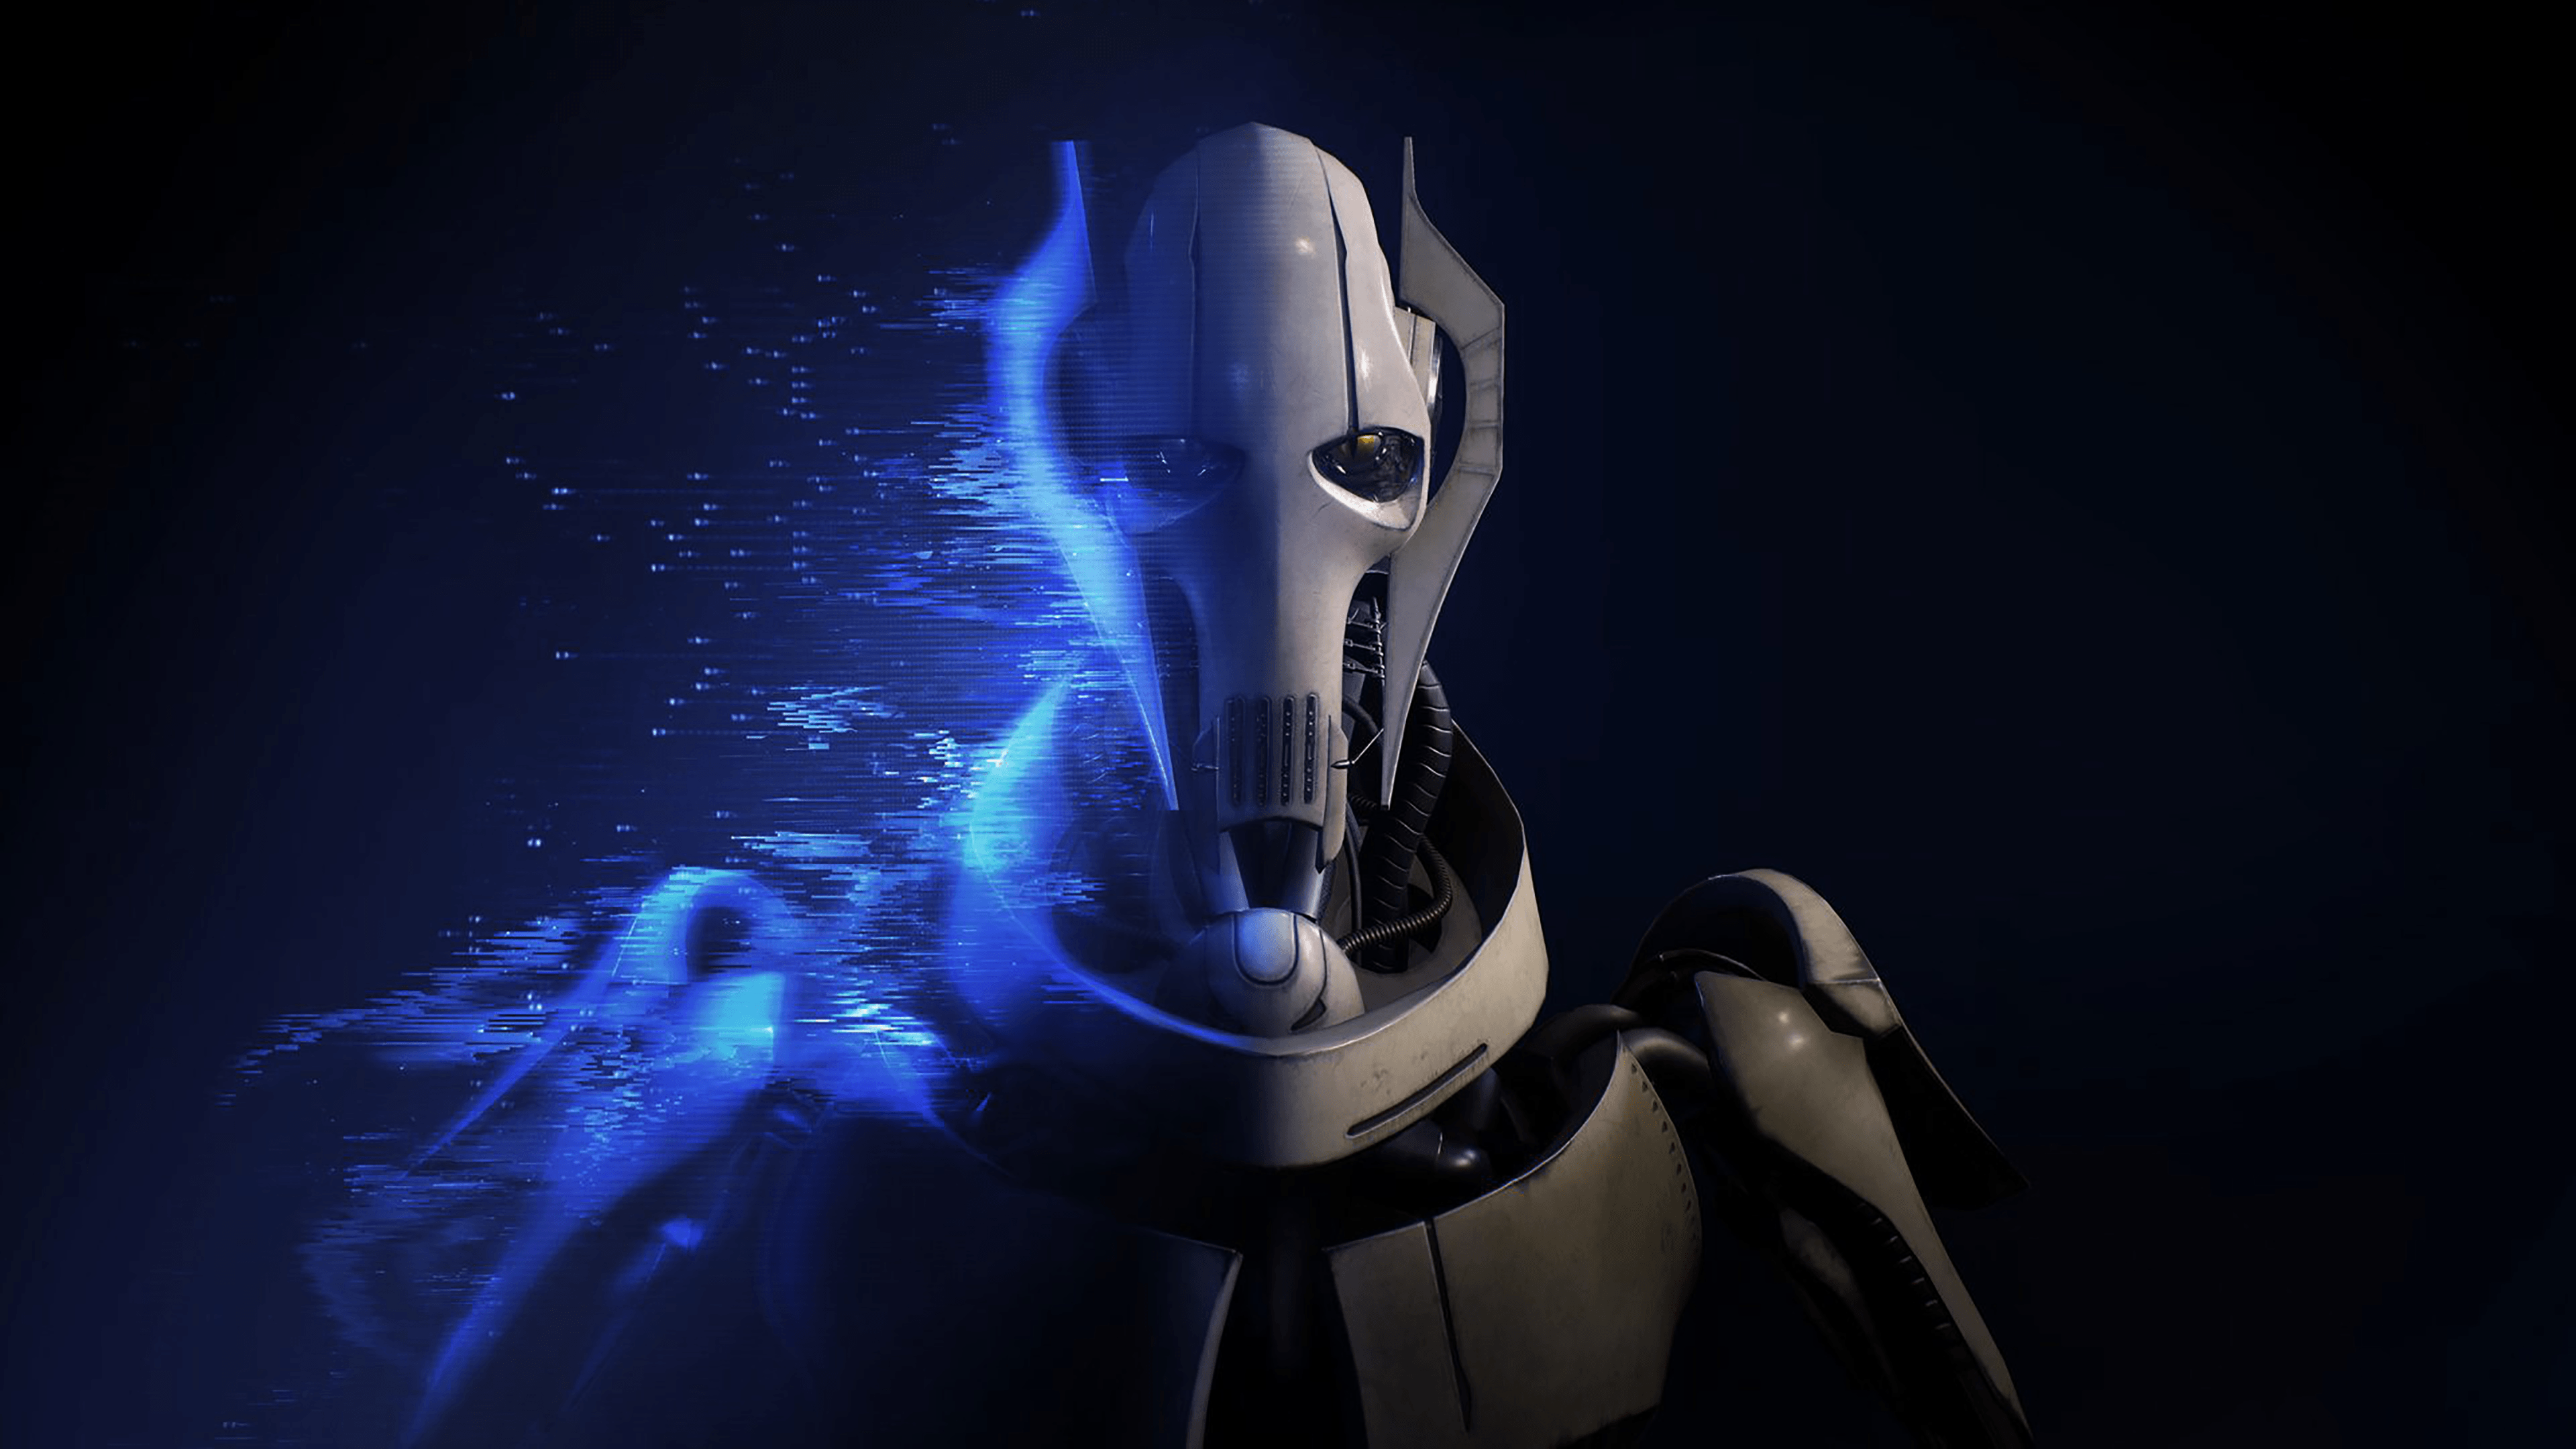 4K Grievous wallpaper cropped to 16:9 as the